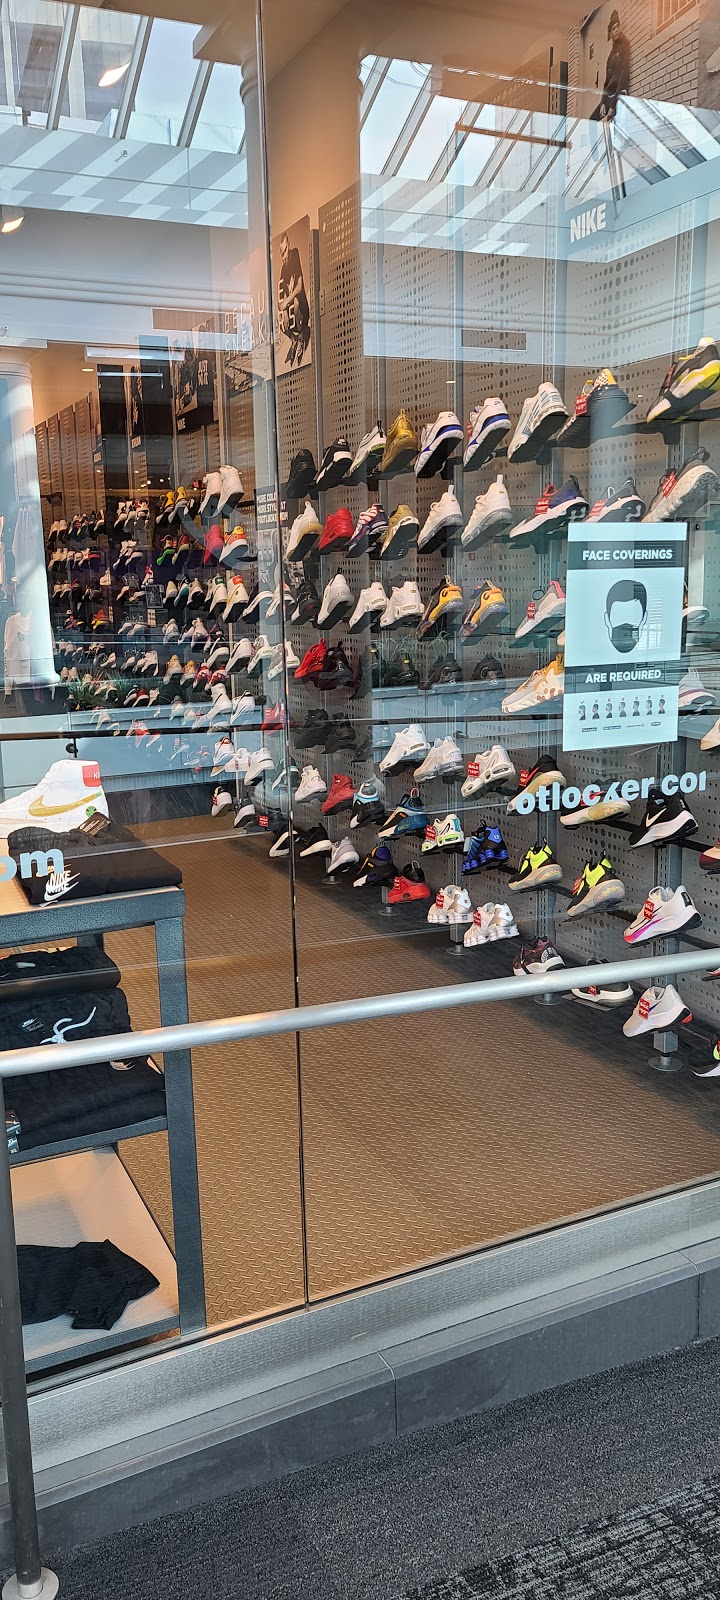 Foot Locker | 125 Westchester Ave Suite 3110A, White Plains, NY 10601 | Phone: (914) 288-0520